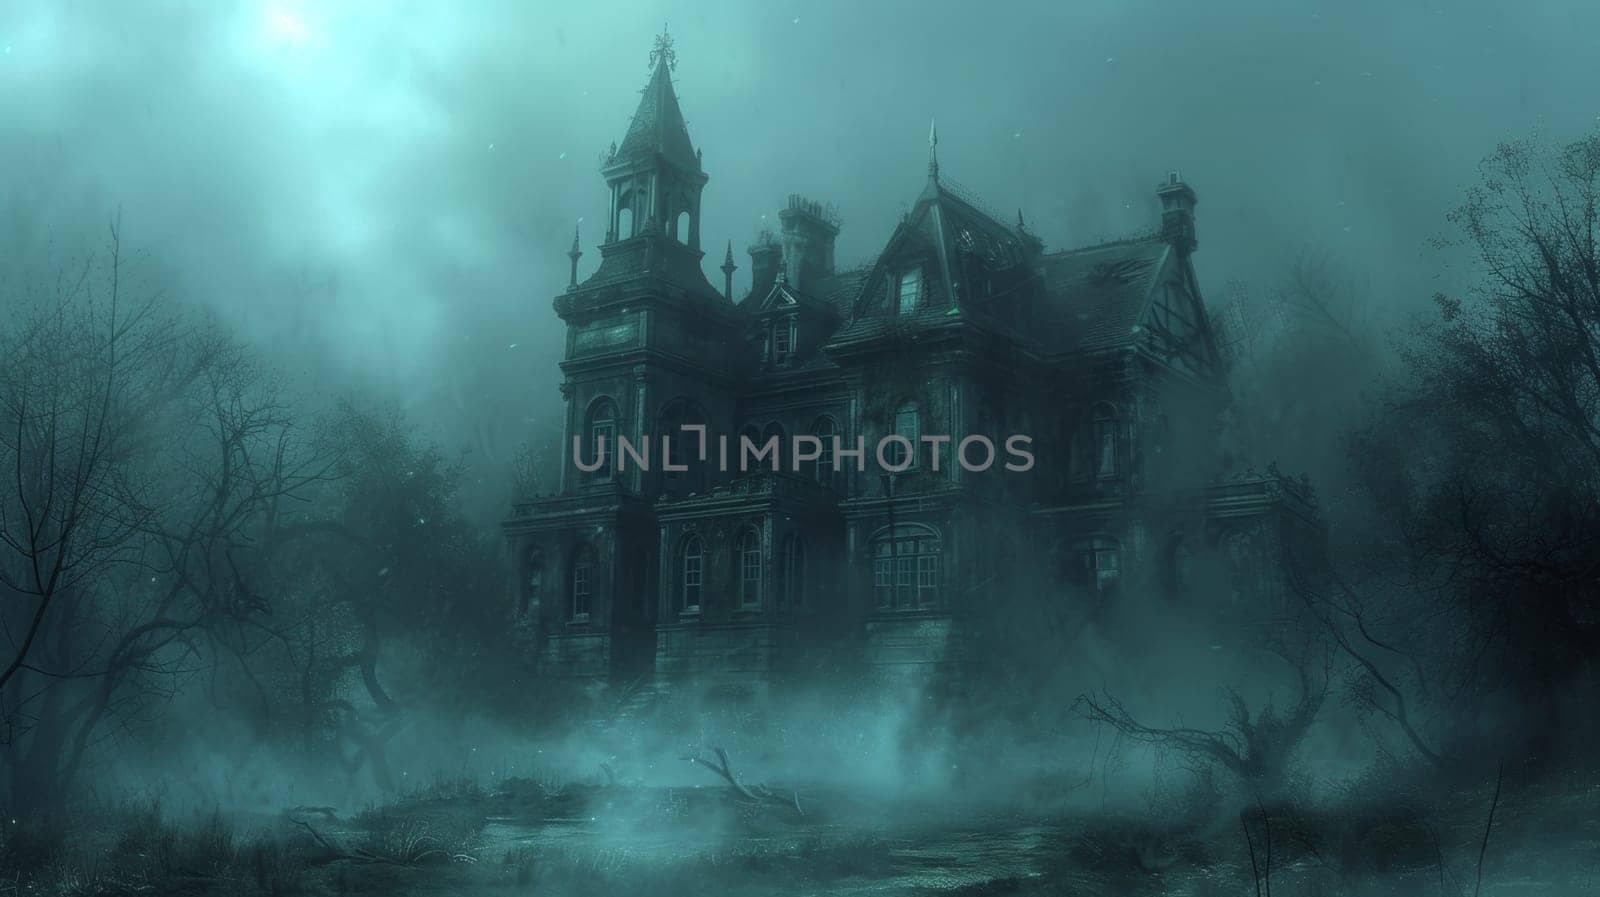 A creepy looking house in the fog with a clock tower